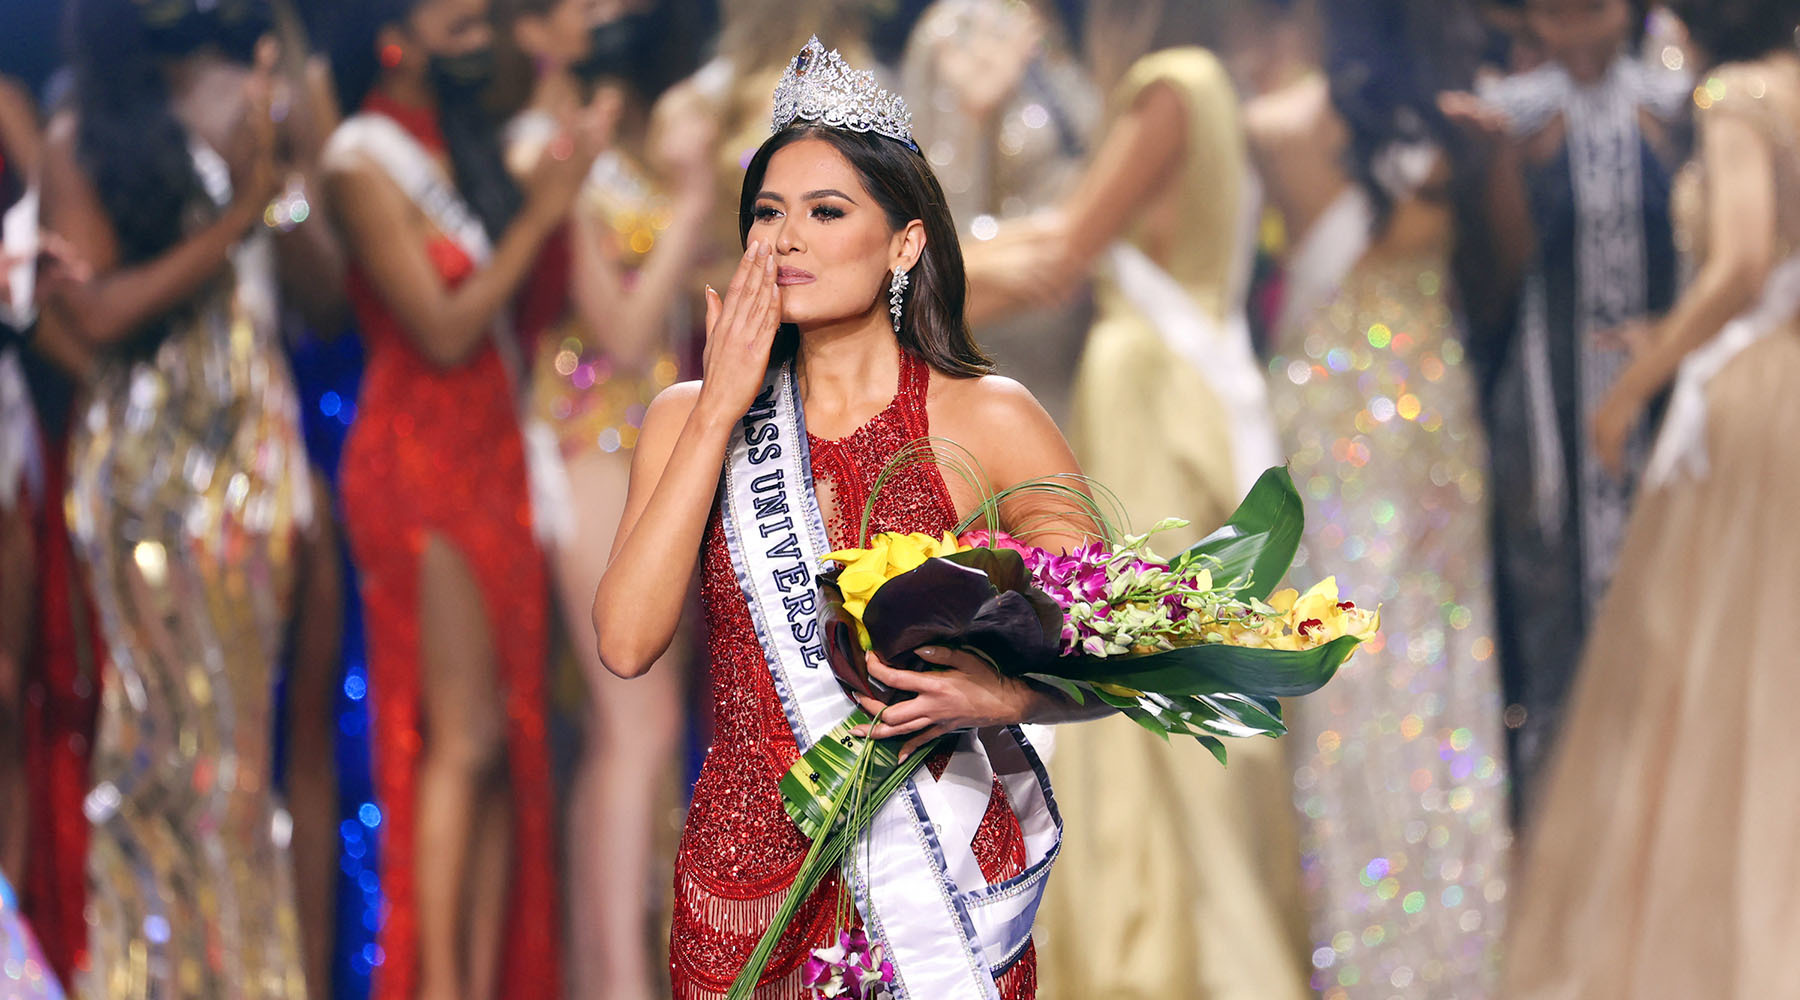 The Representative Of Mexico Wins The Miss Universe Pageant Teller Report